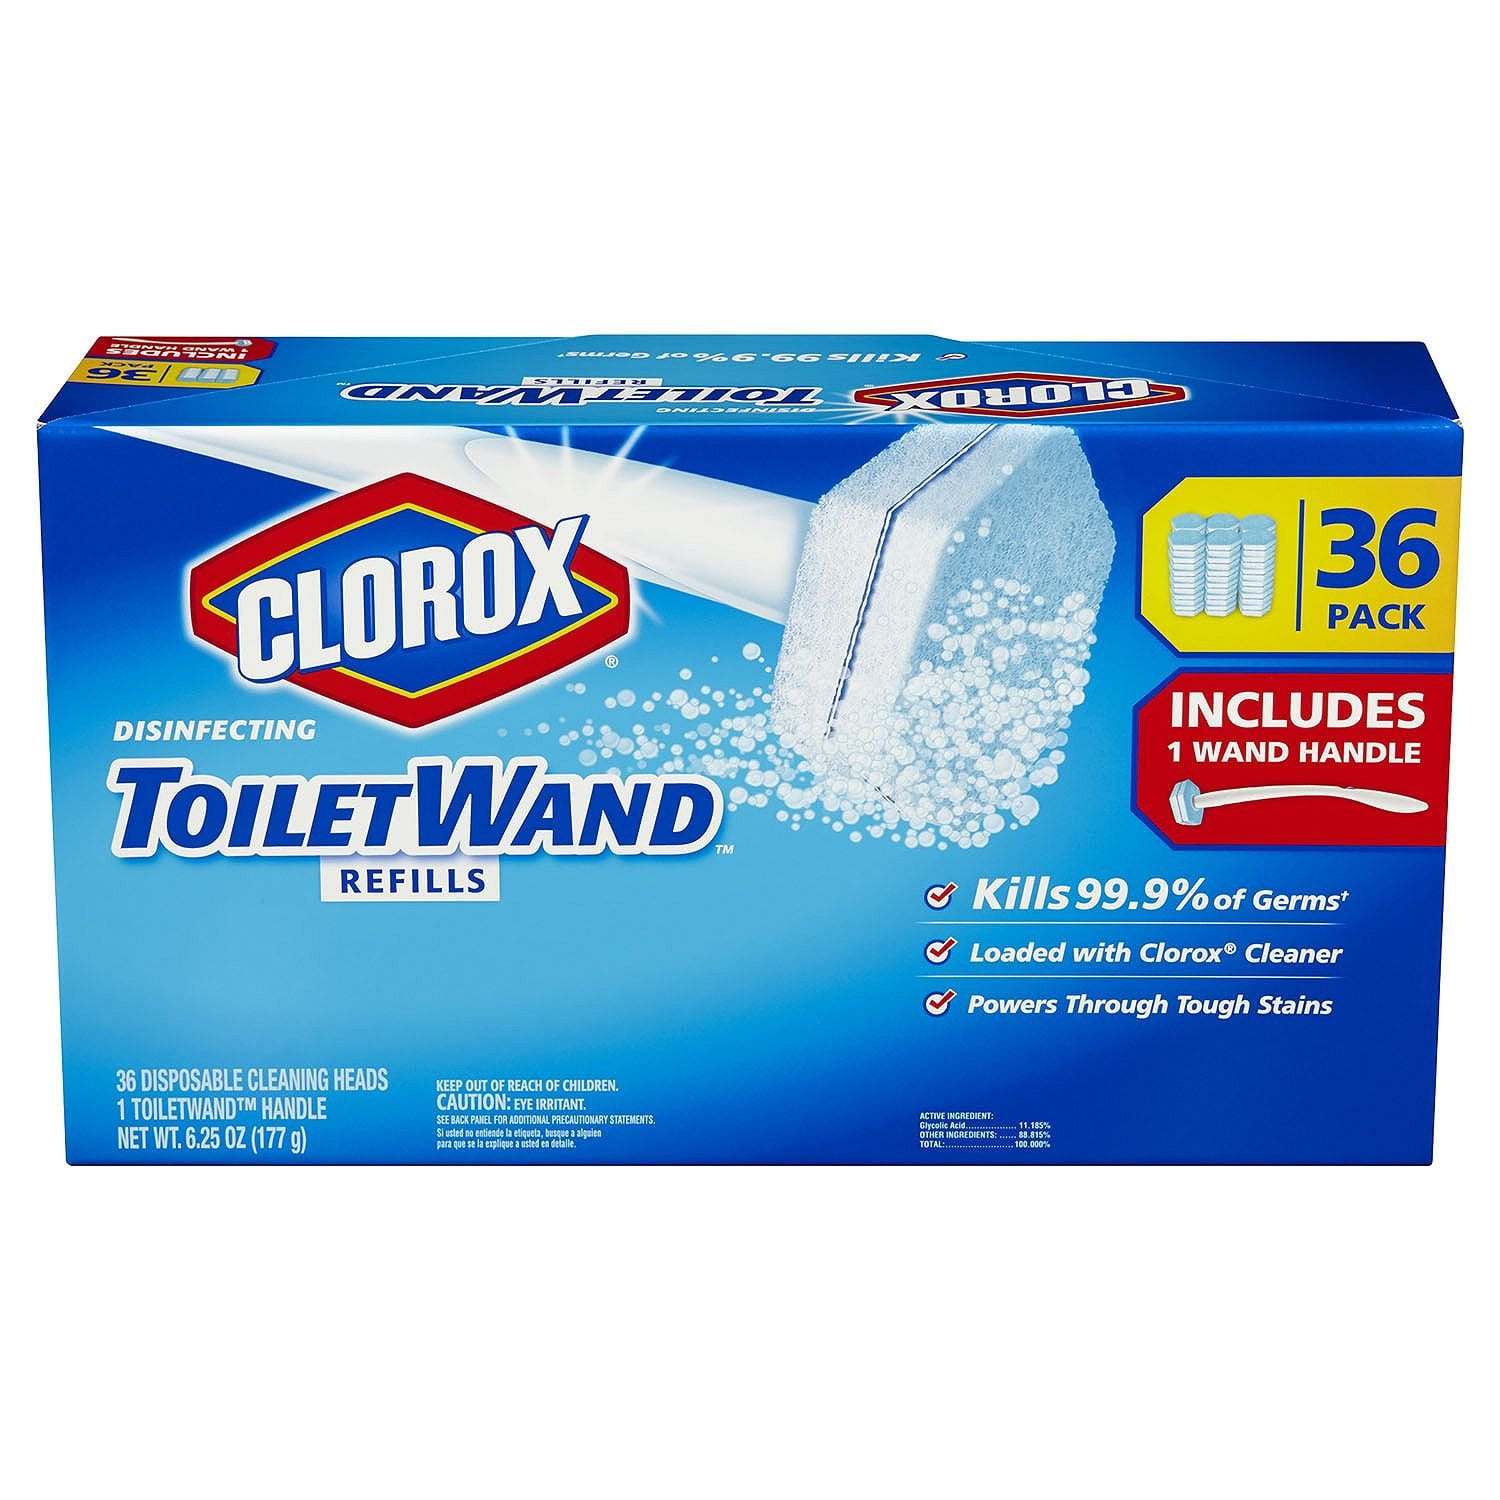 Clorox ToiletWand Disposable Toilet Cleaning System with 36 Refills